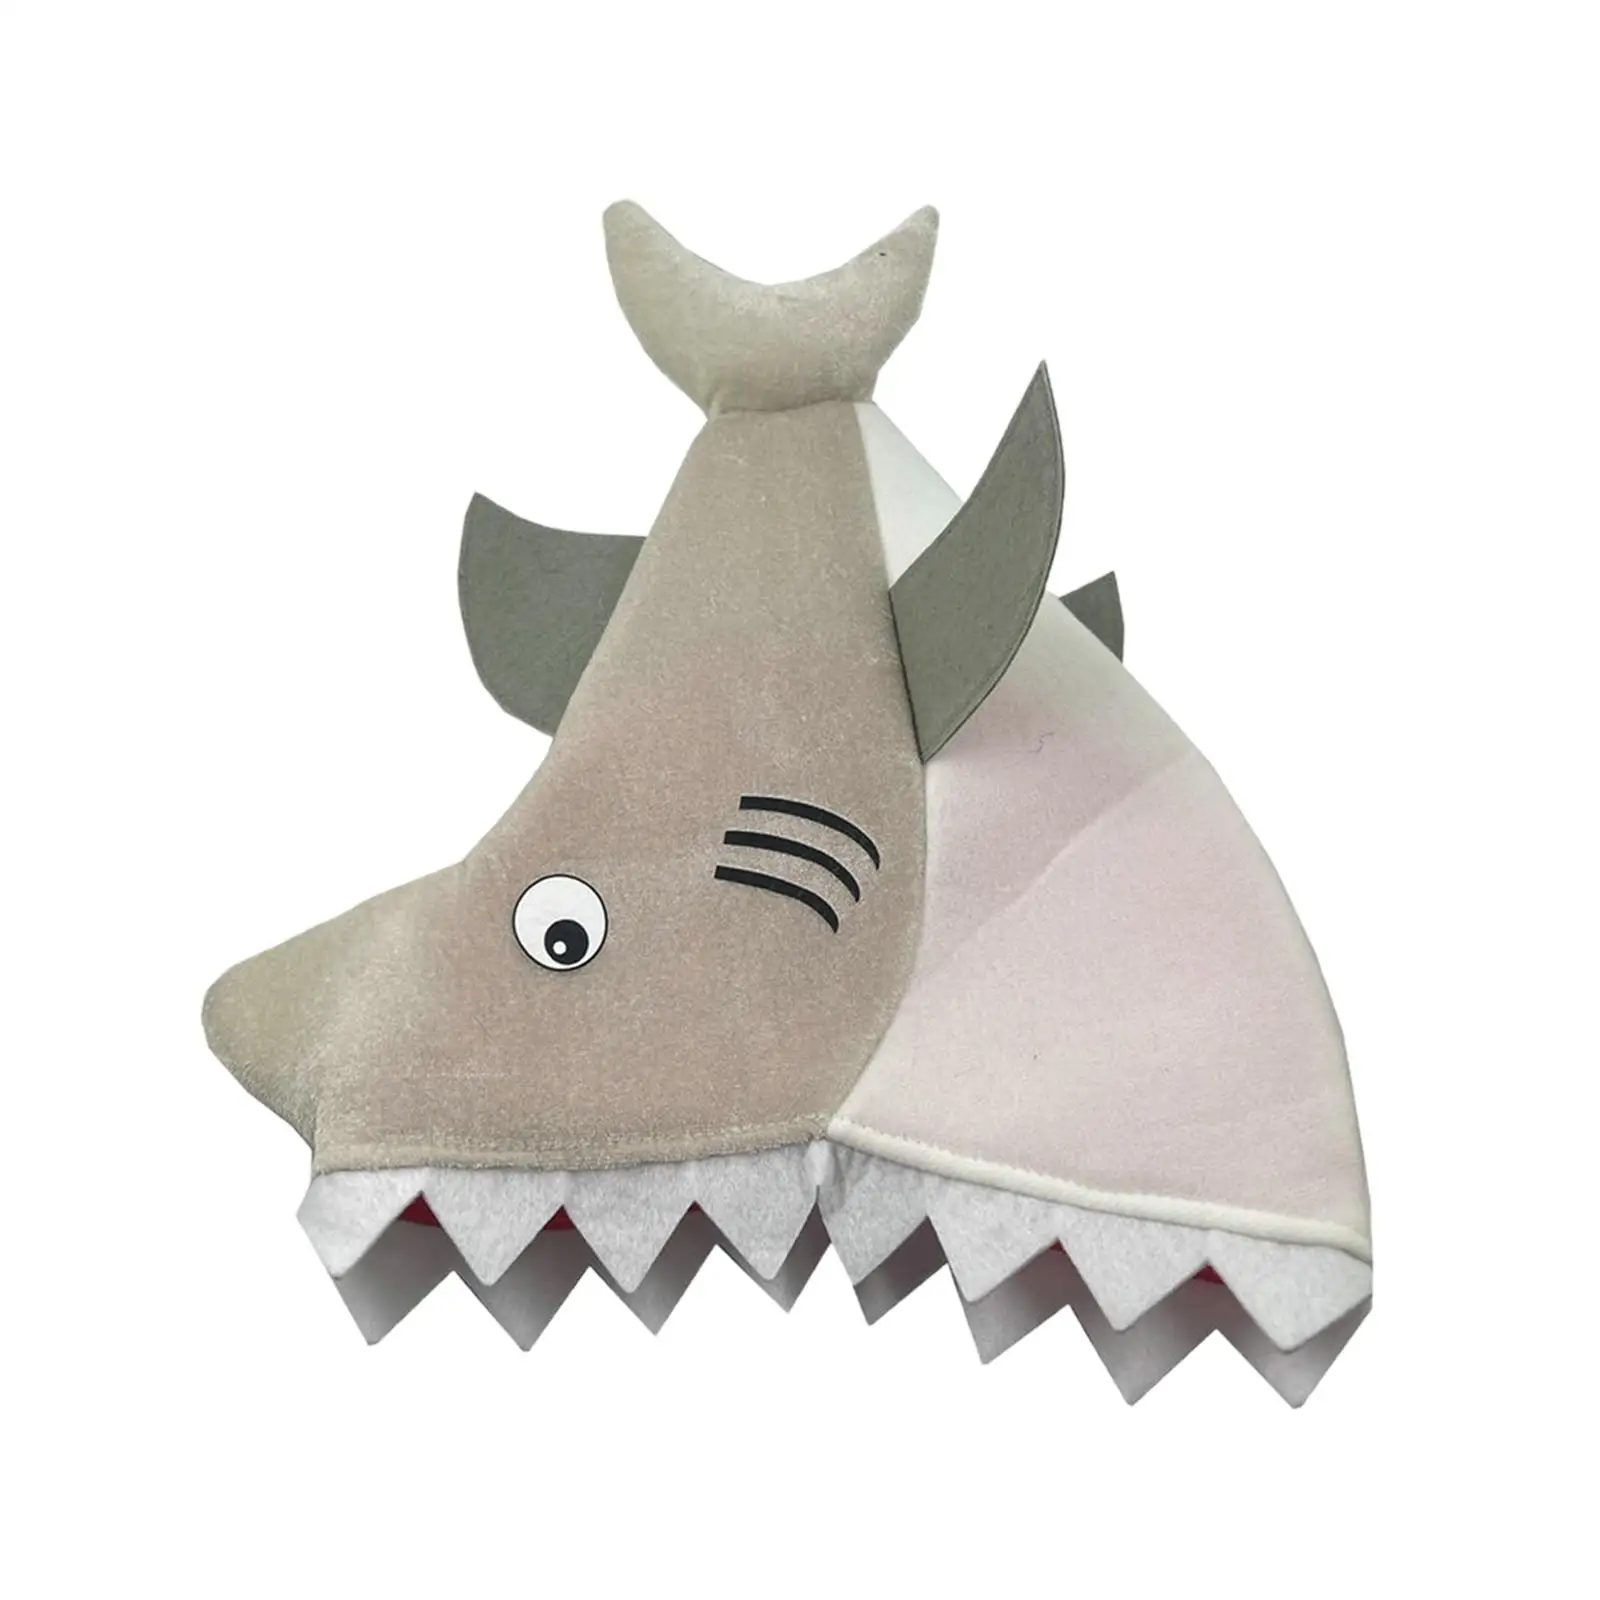 Funny Plush Animal Hat Costume Hats Cosplay Headwear for Stage Performance Dress up Hat